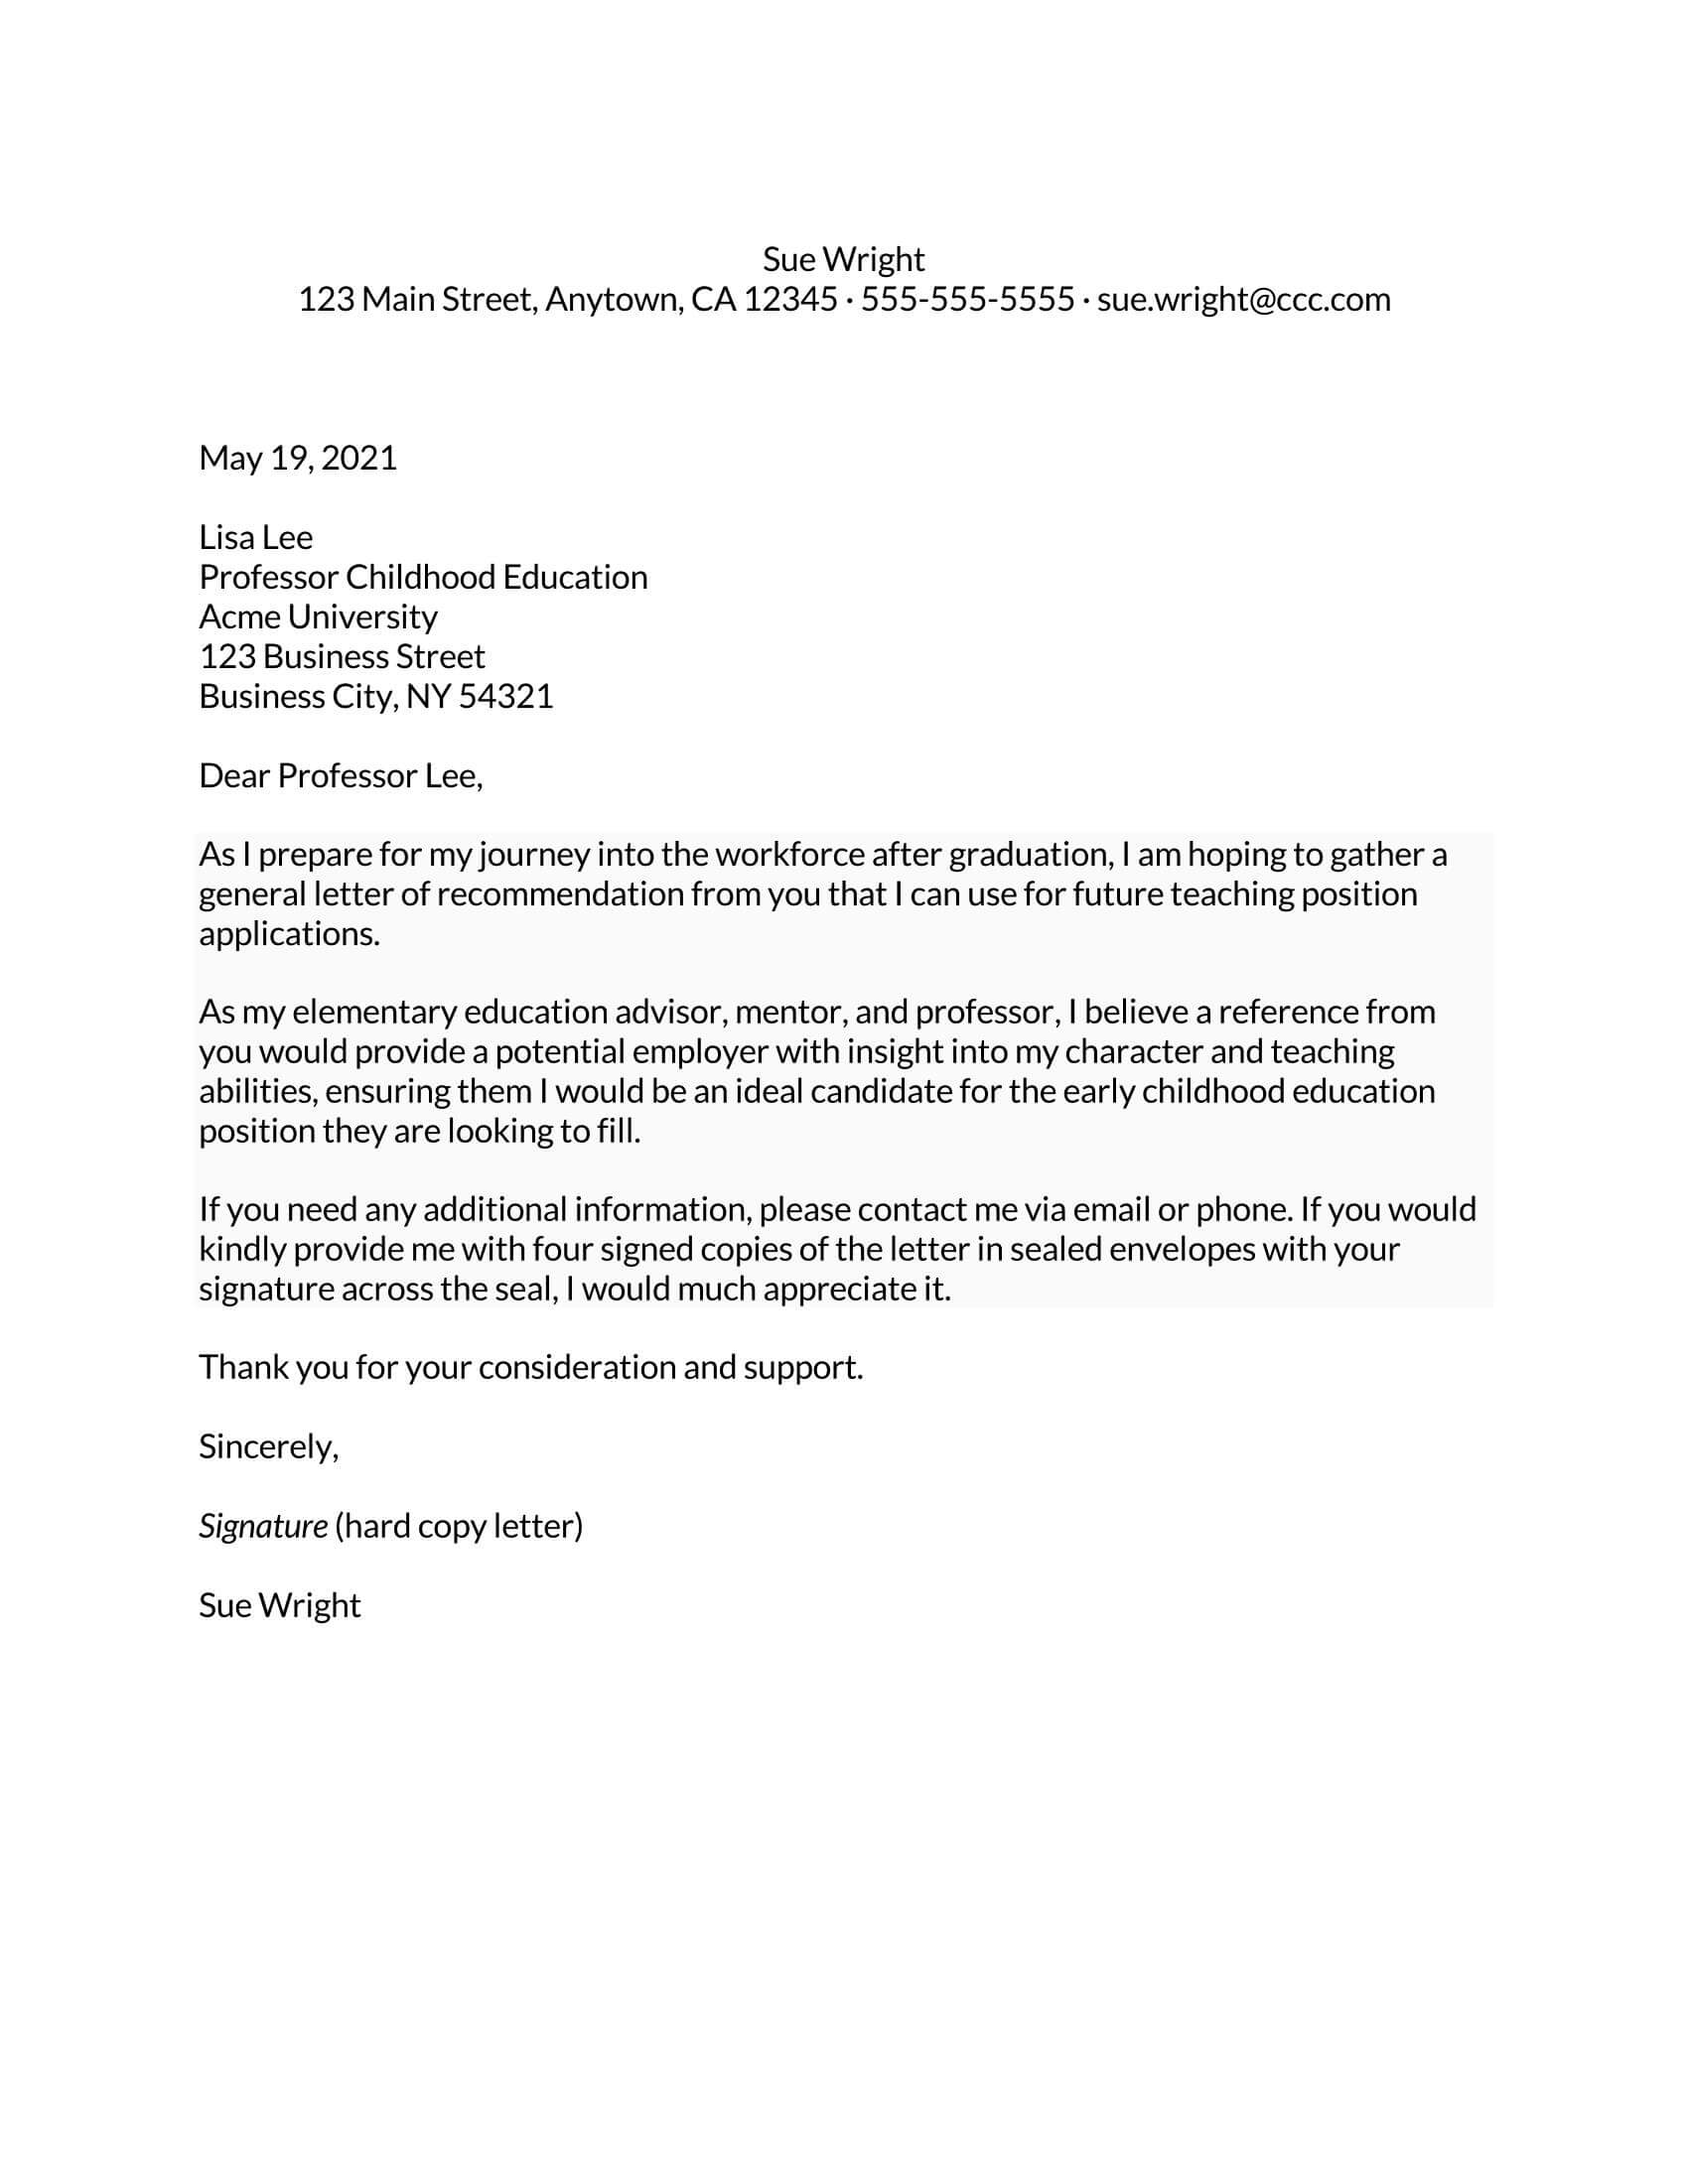 Printable academic reference letter sample for free